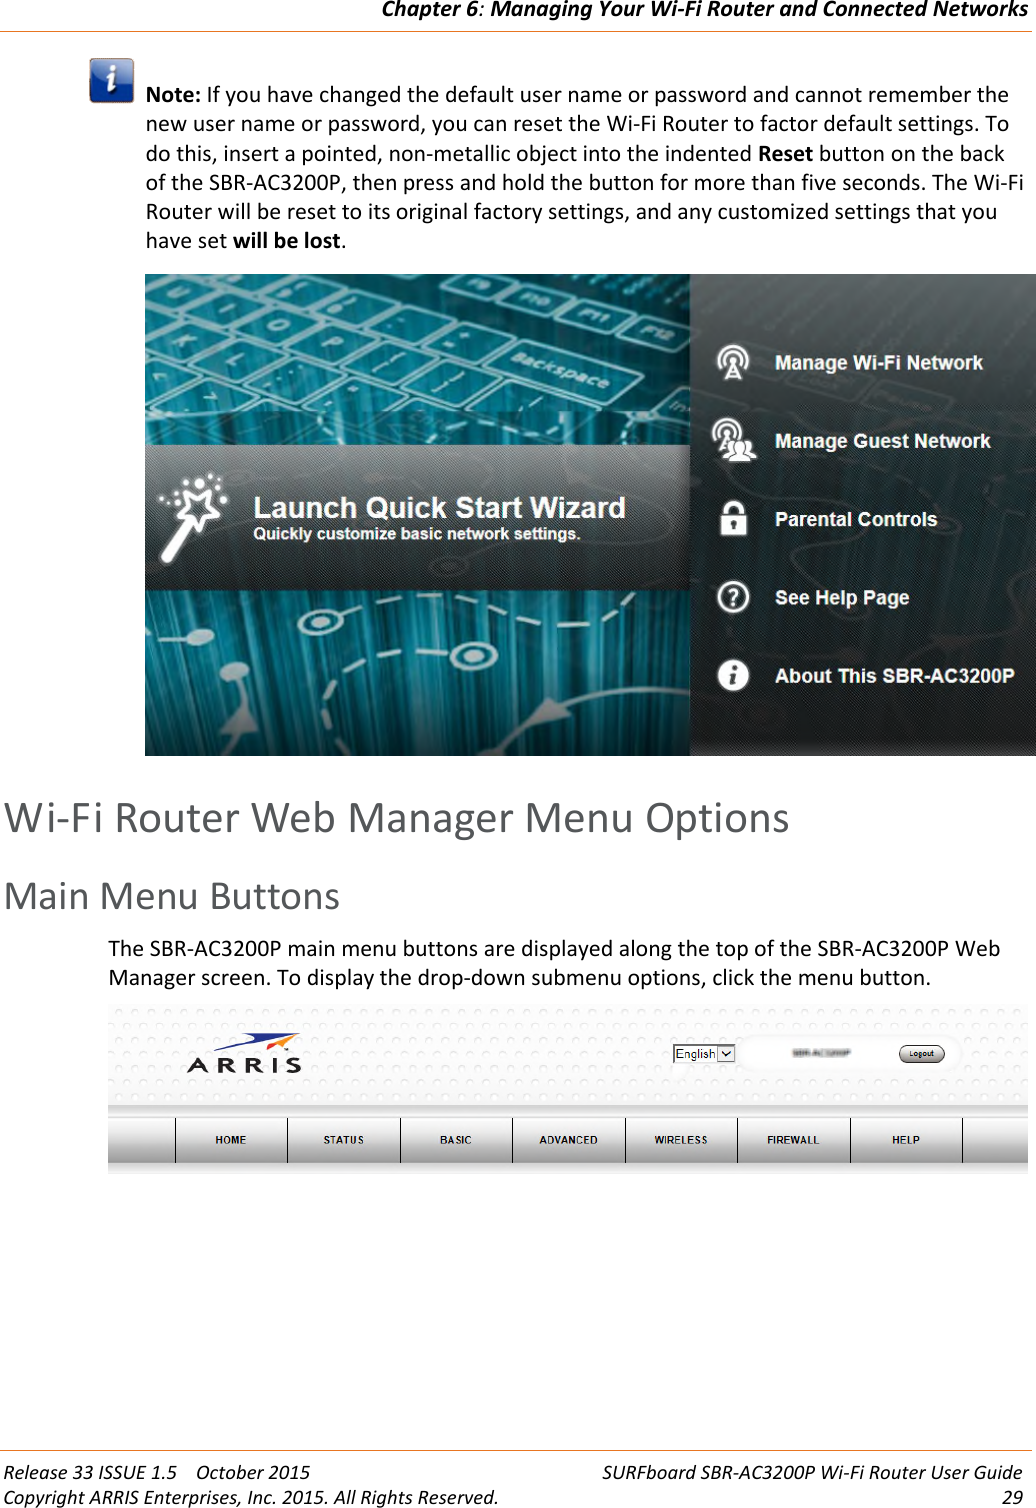 Chapter 6:Managing Your Wi-Fi Router and Connected NetworksRelease 33 ISSUE 1.5 October 2015 SURFboard SBR-AC3200P Wi-Fi Router User GuideCopyright ARRIS Enterprises, Inc. 2015. All Rights Reserved. 29Note: If you have changed the default user name or password and cannot remember thenew user name or password, you can reset the Wi-Fi Router to factor default settings. Todo this, insert a pointed, non-metallic object into the indented Reset button on the backof the SBR-AC3200P, then press and hold the button for more than five seconds. The Wi-FiRouter will be reset to its original factory settings, and any customized settings that youhave set will be lost.Wi-Fi Router Web Manager Menu OptionsMain Menu ButtonsThe SBR-AC3200P main menu buttons are displayed along the top of the SBR-AC3200P WebManager screen. To display the drop-down submenu options, click the menu button.